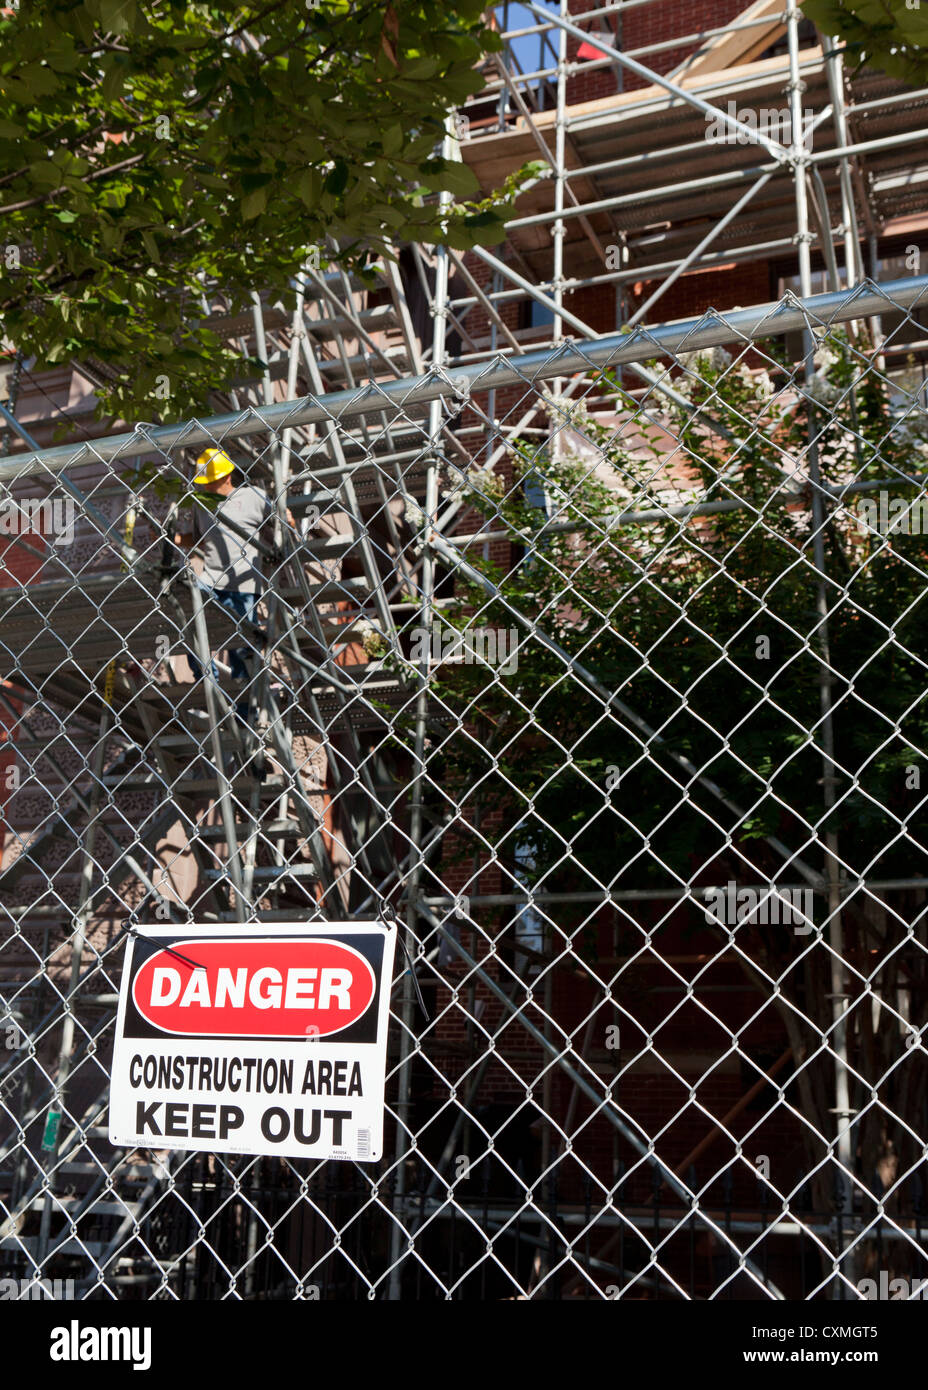 Danger sign on fenced construction area Stock Photo